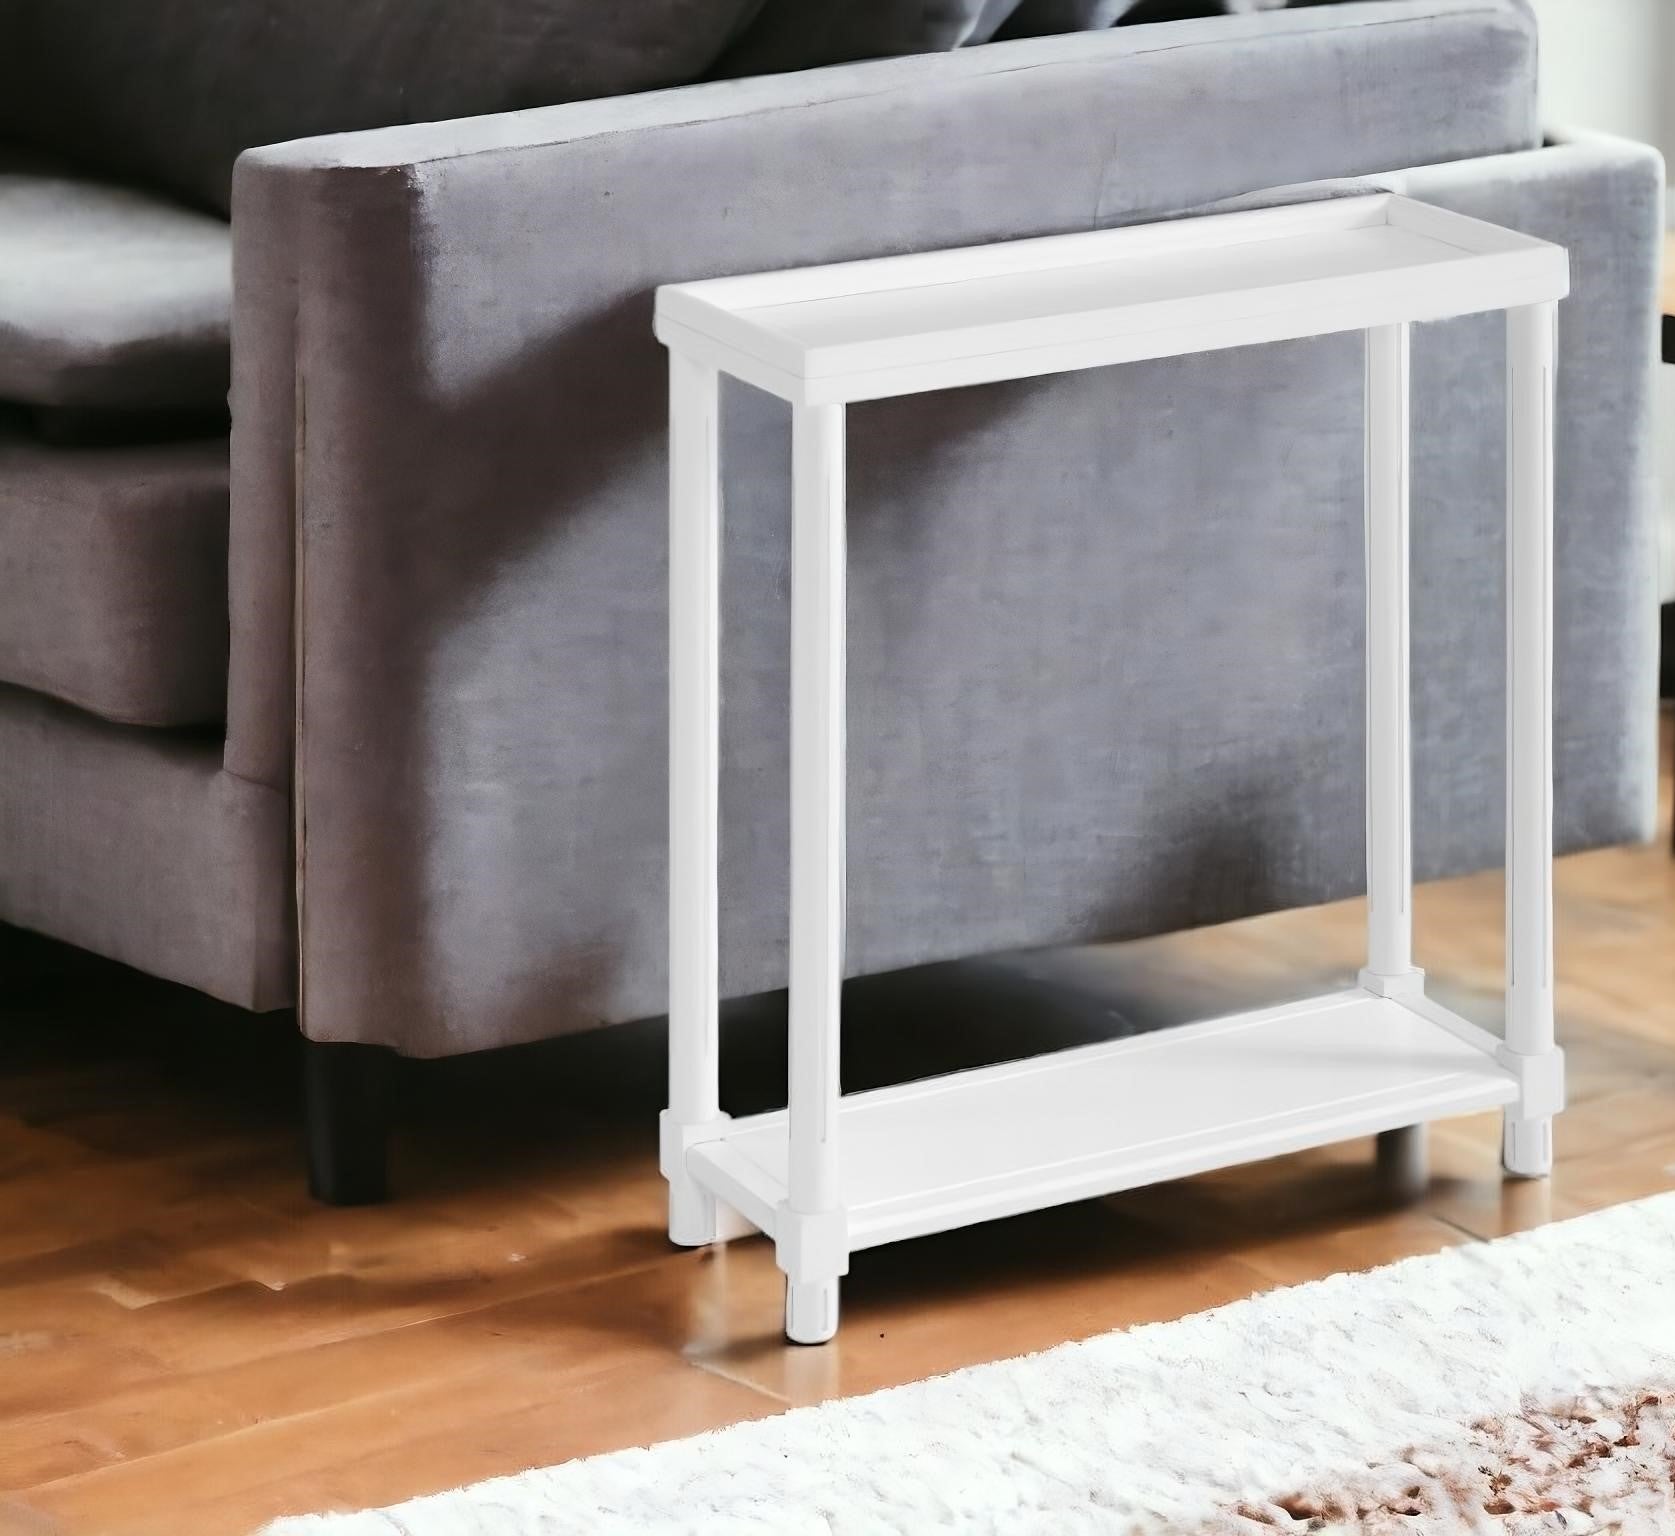 Set Of Two 24" White Narrow Wood End Tables With Shelf